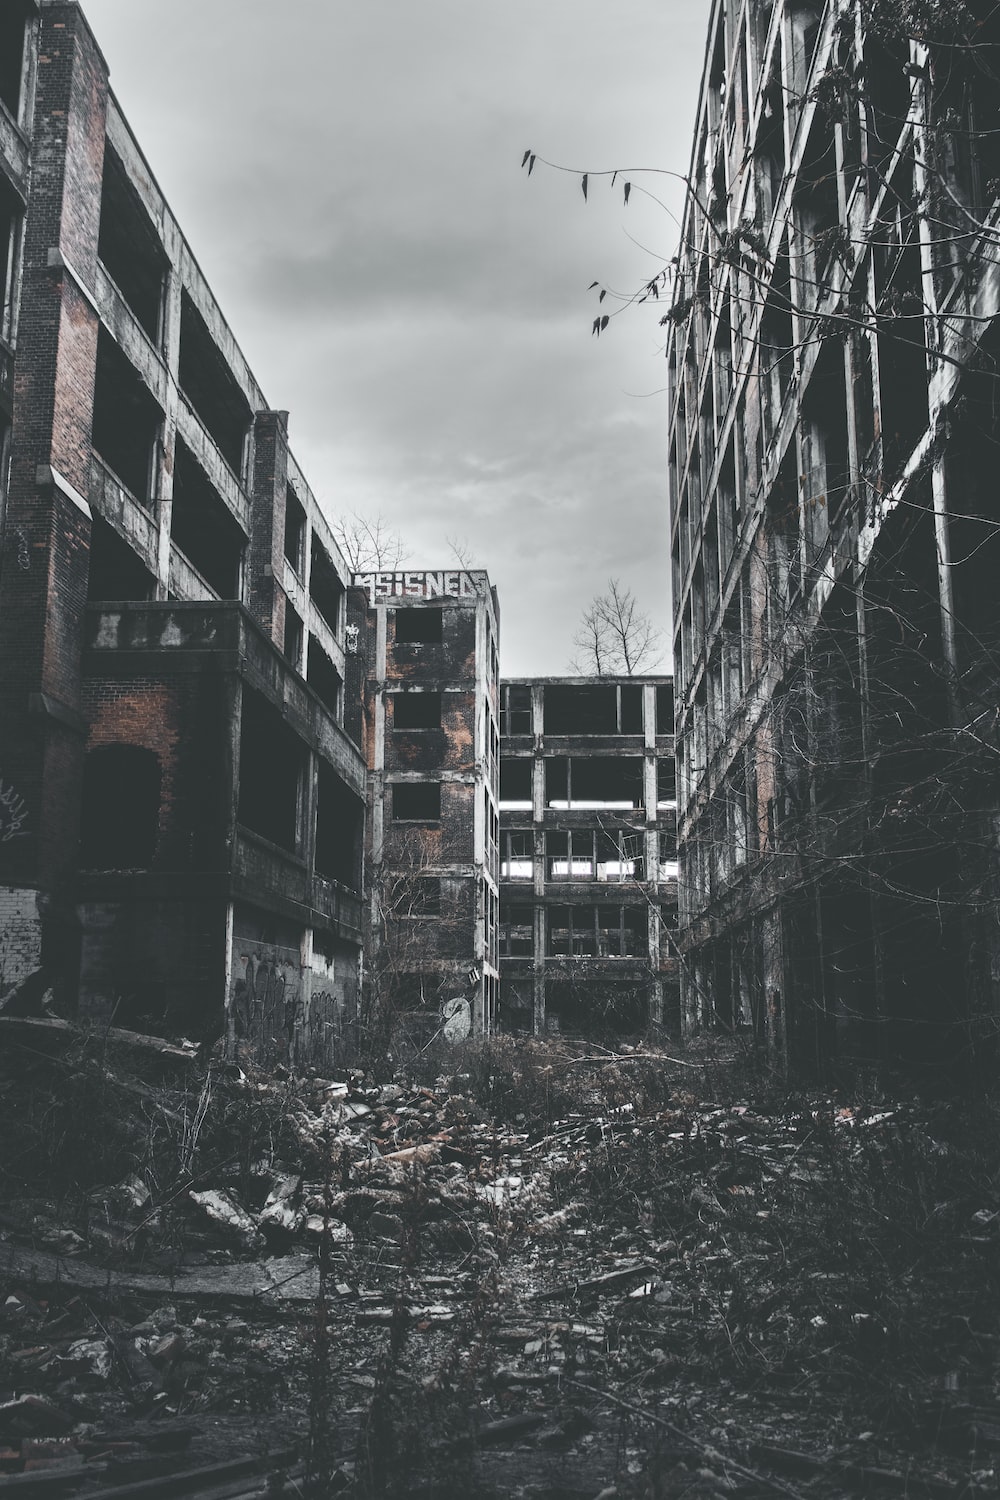 City Ruins Picture. Download Free Image